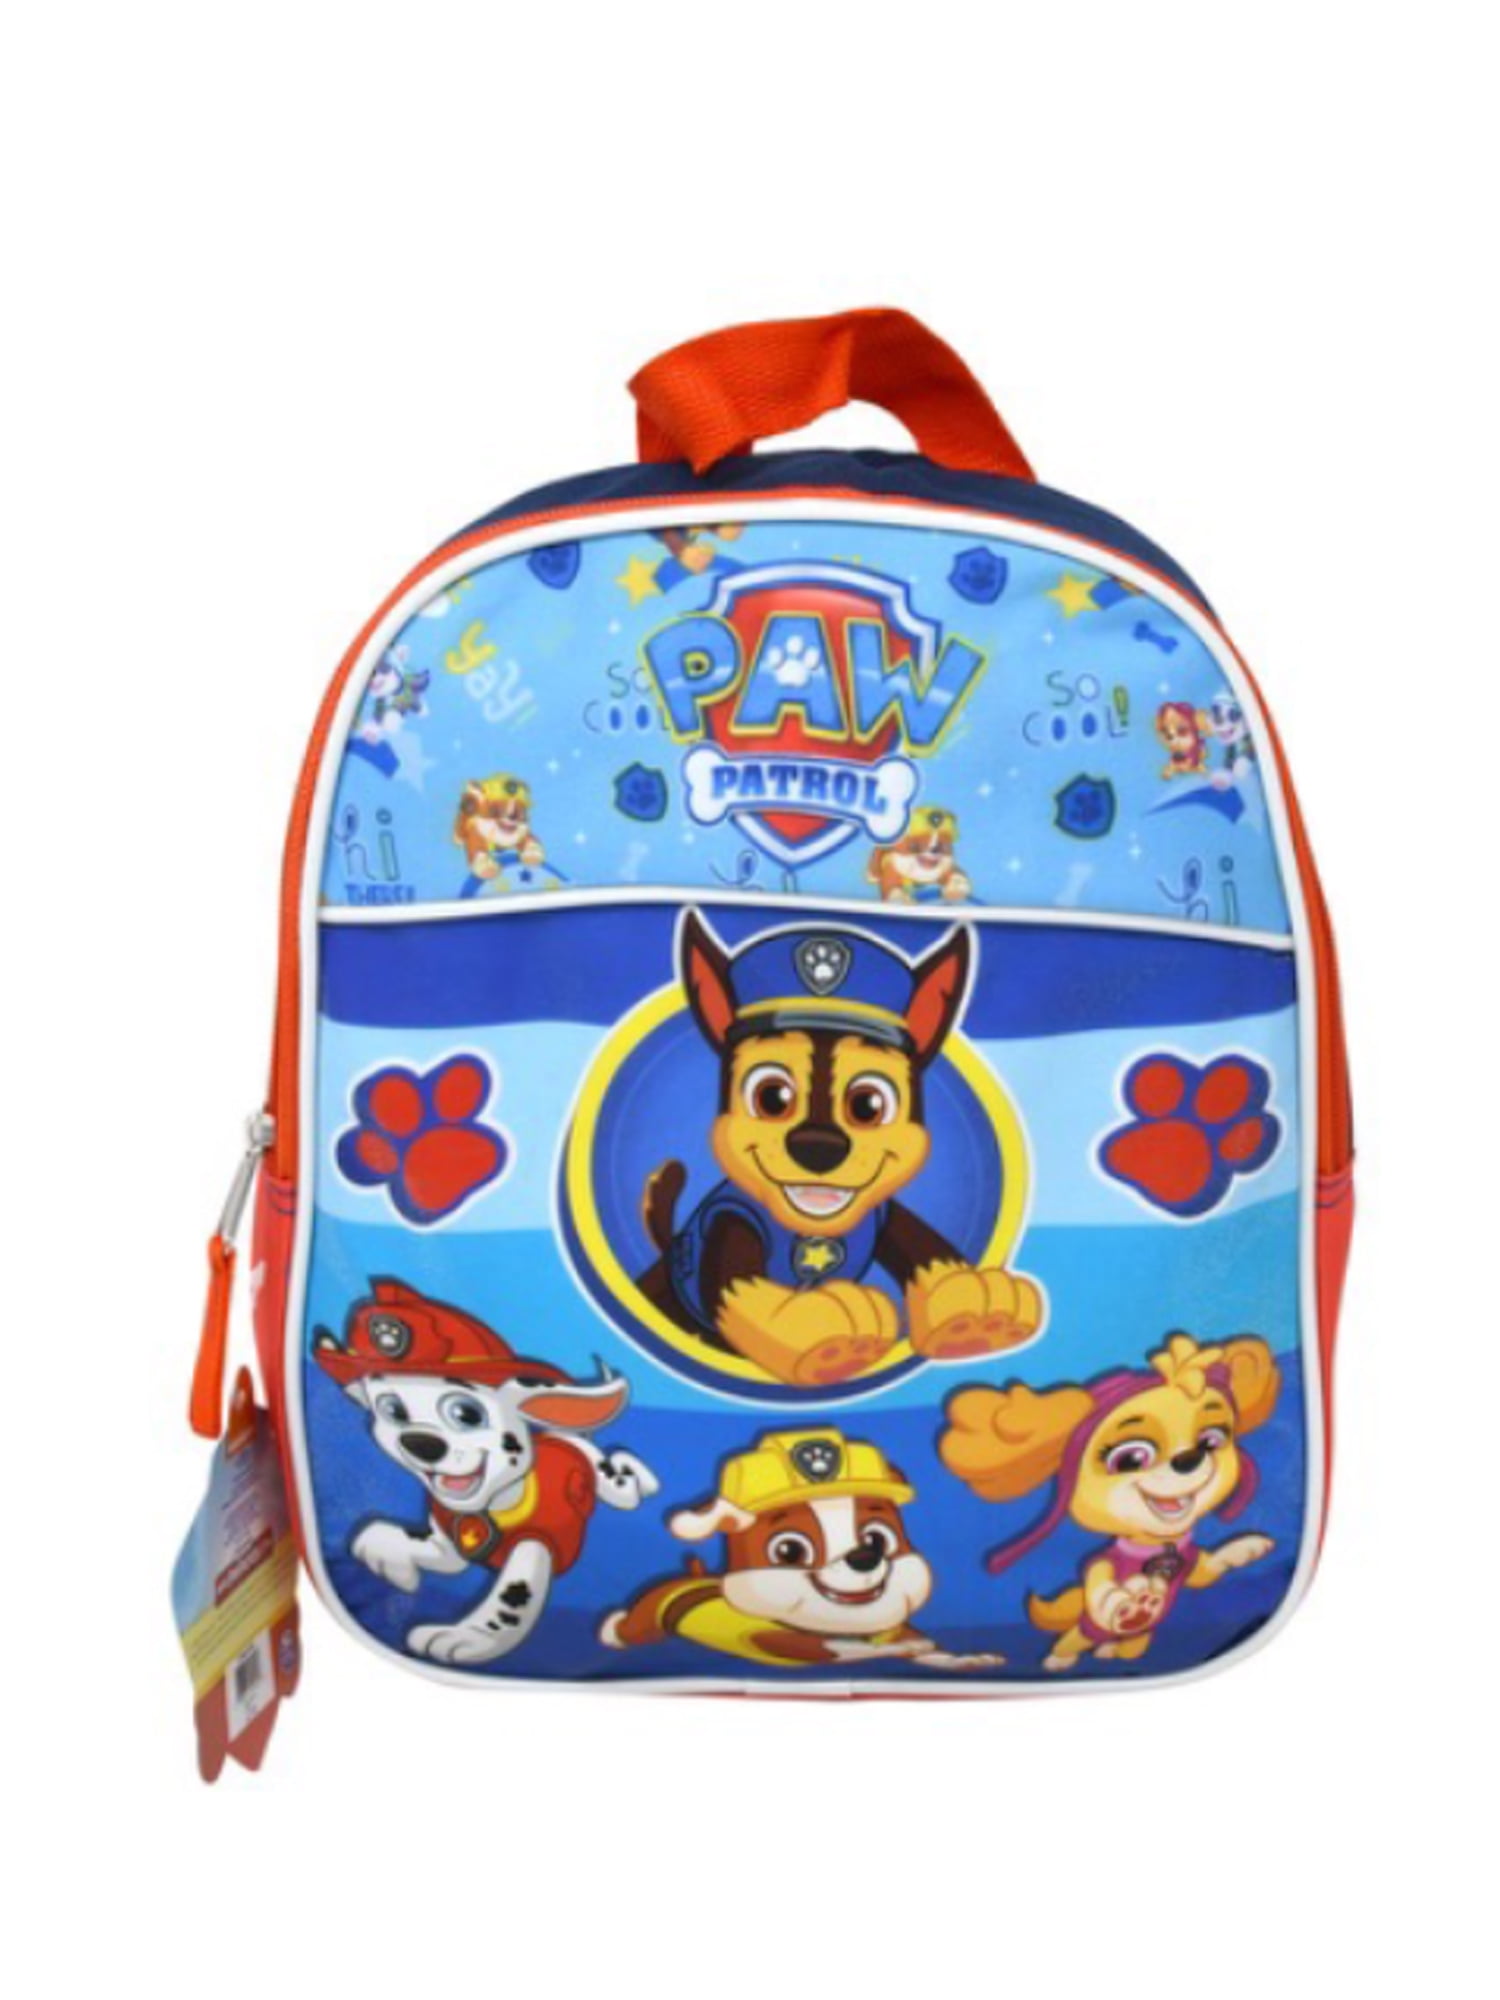 Boys Rolling Backpack School Book Travel w/ Color Pencils Paw Patrol Team PUPS 